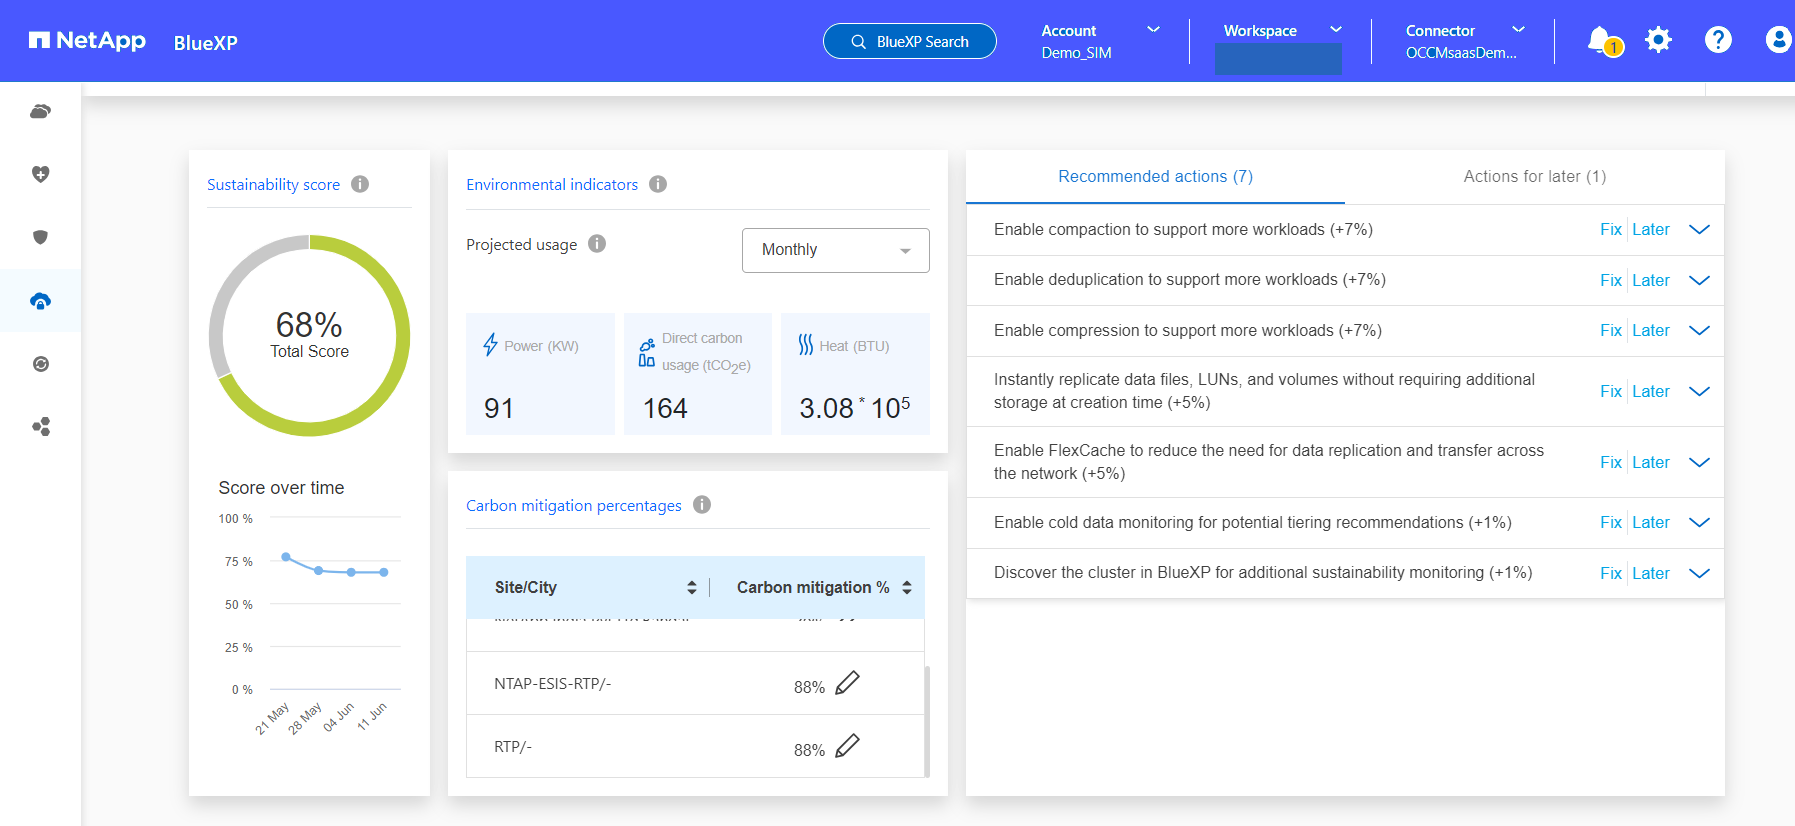 A UI screenshot that gives the overview of the sustainability dashboard in BlueXP.